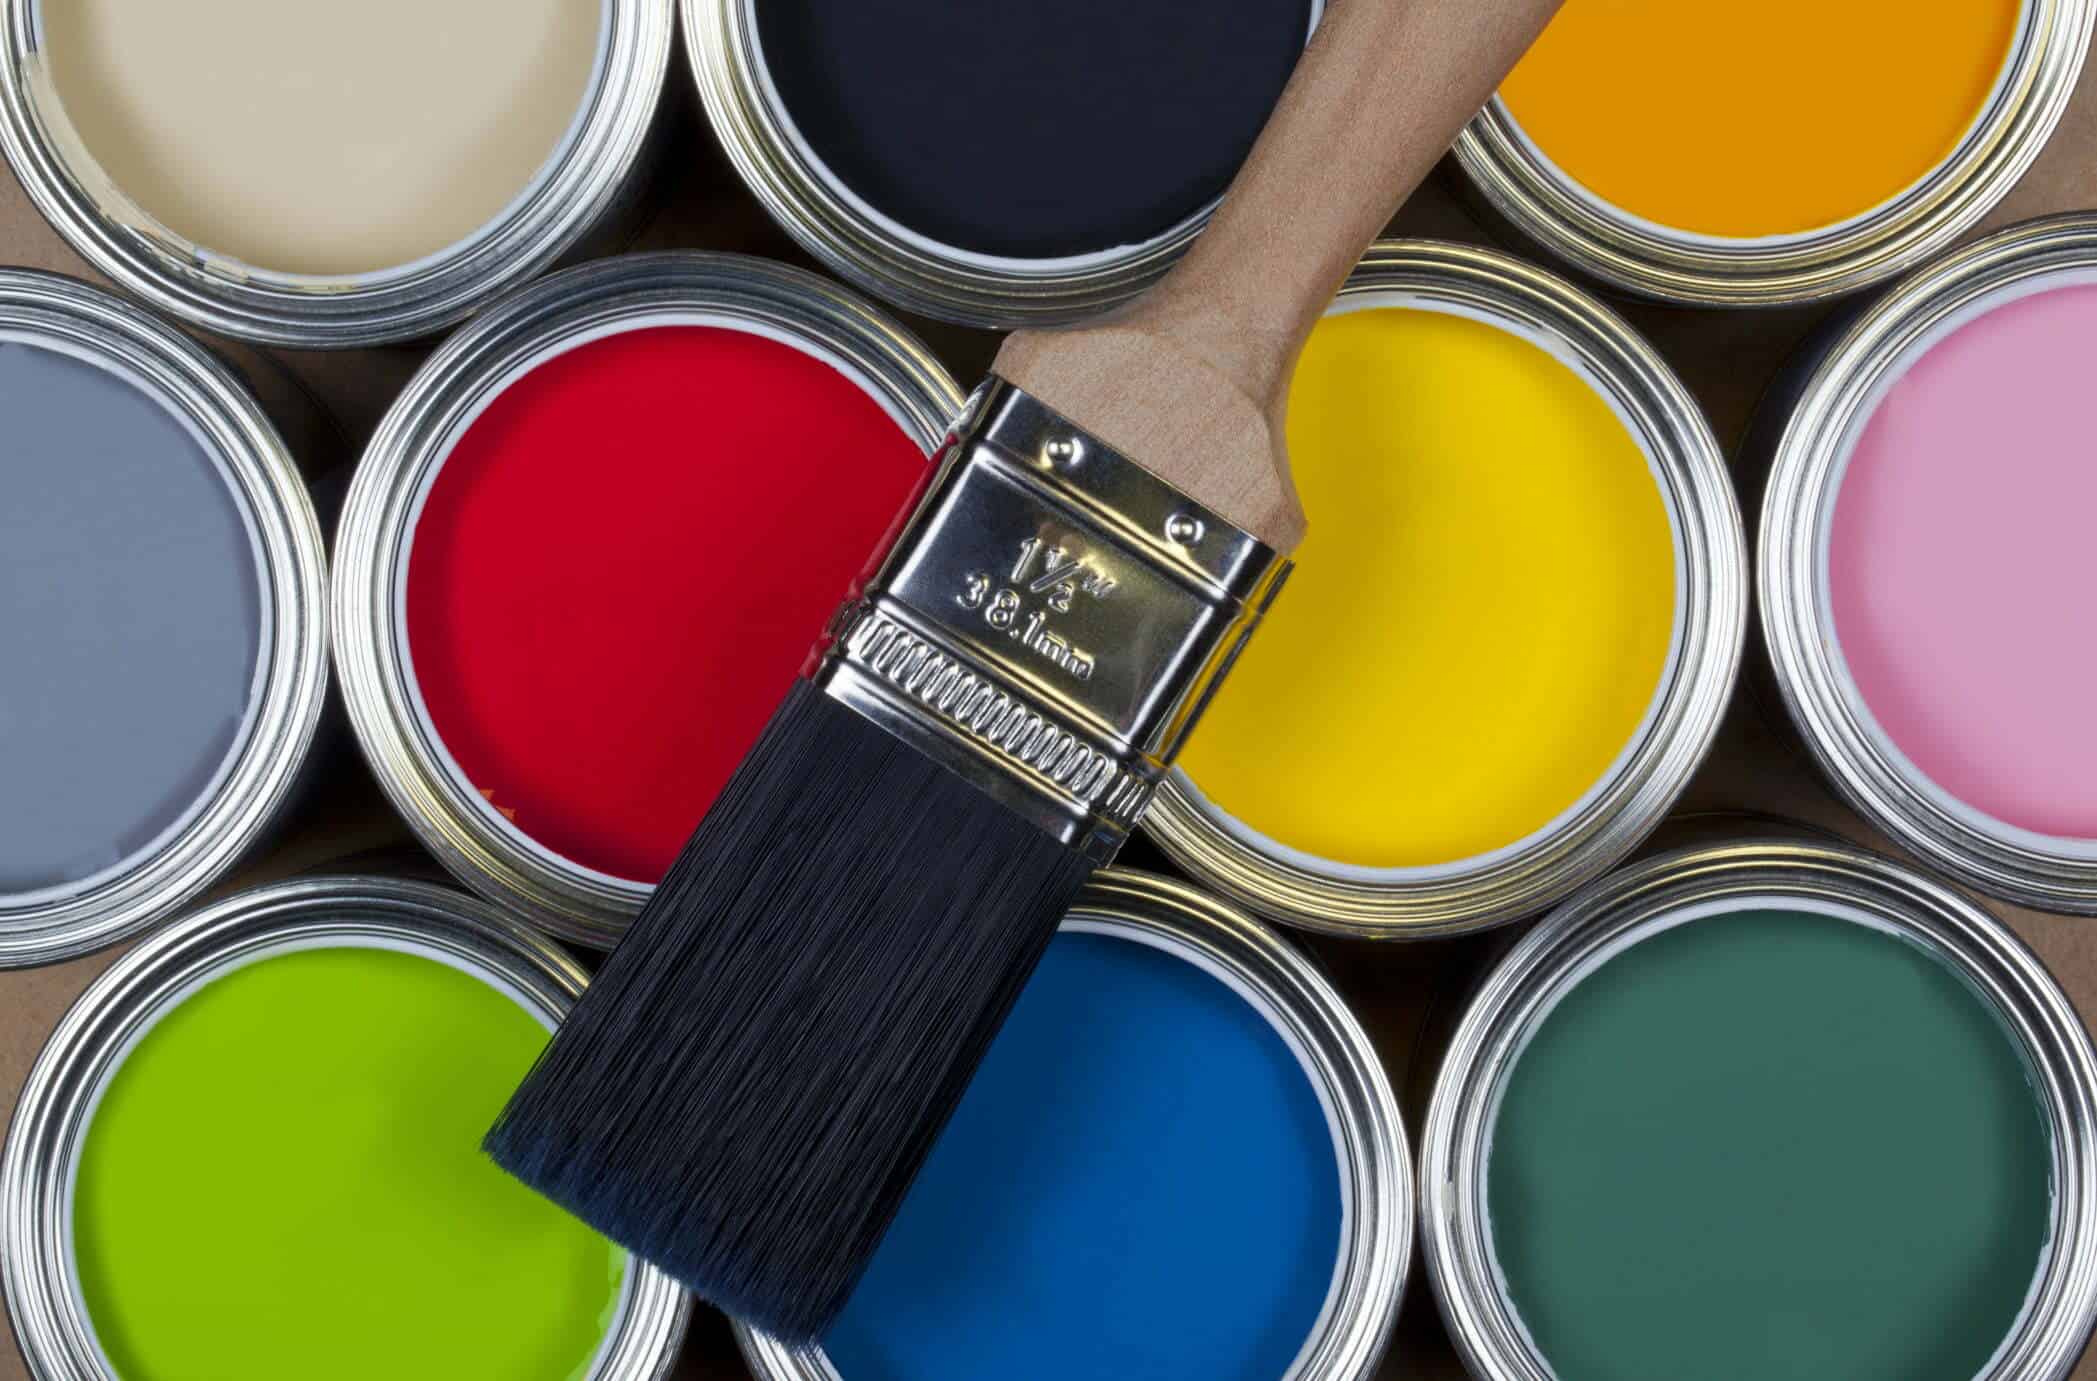 Several tins of paint for article difference between interior and exterior paint